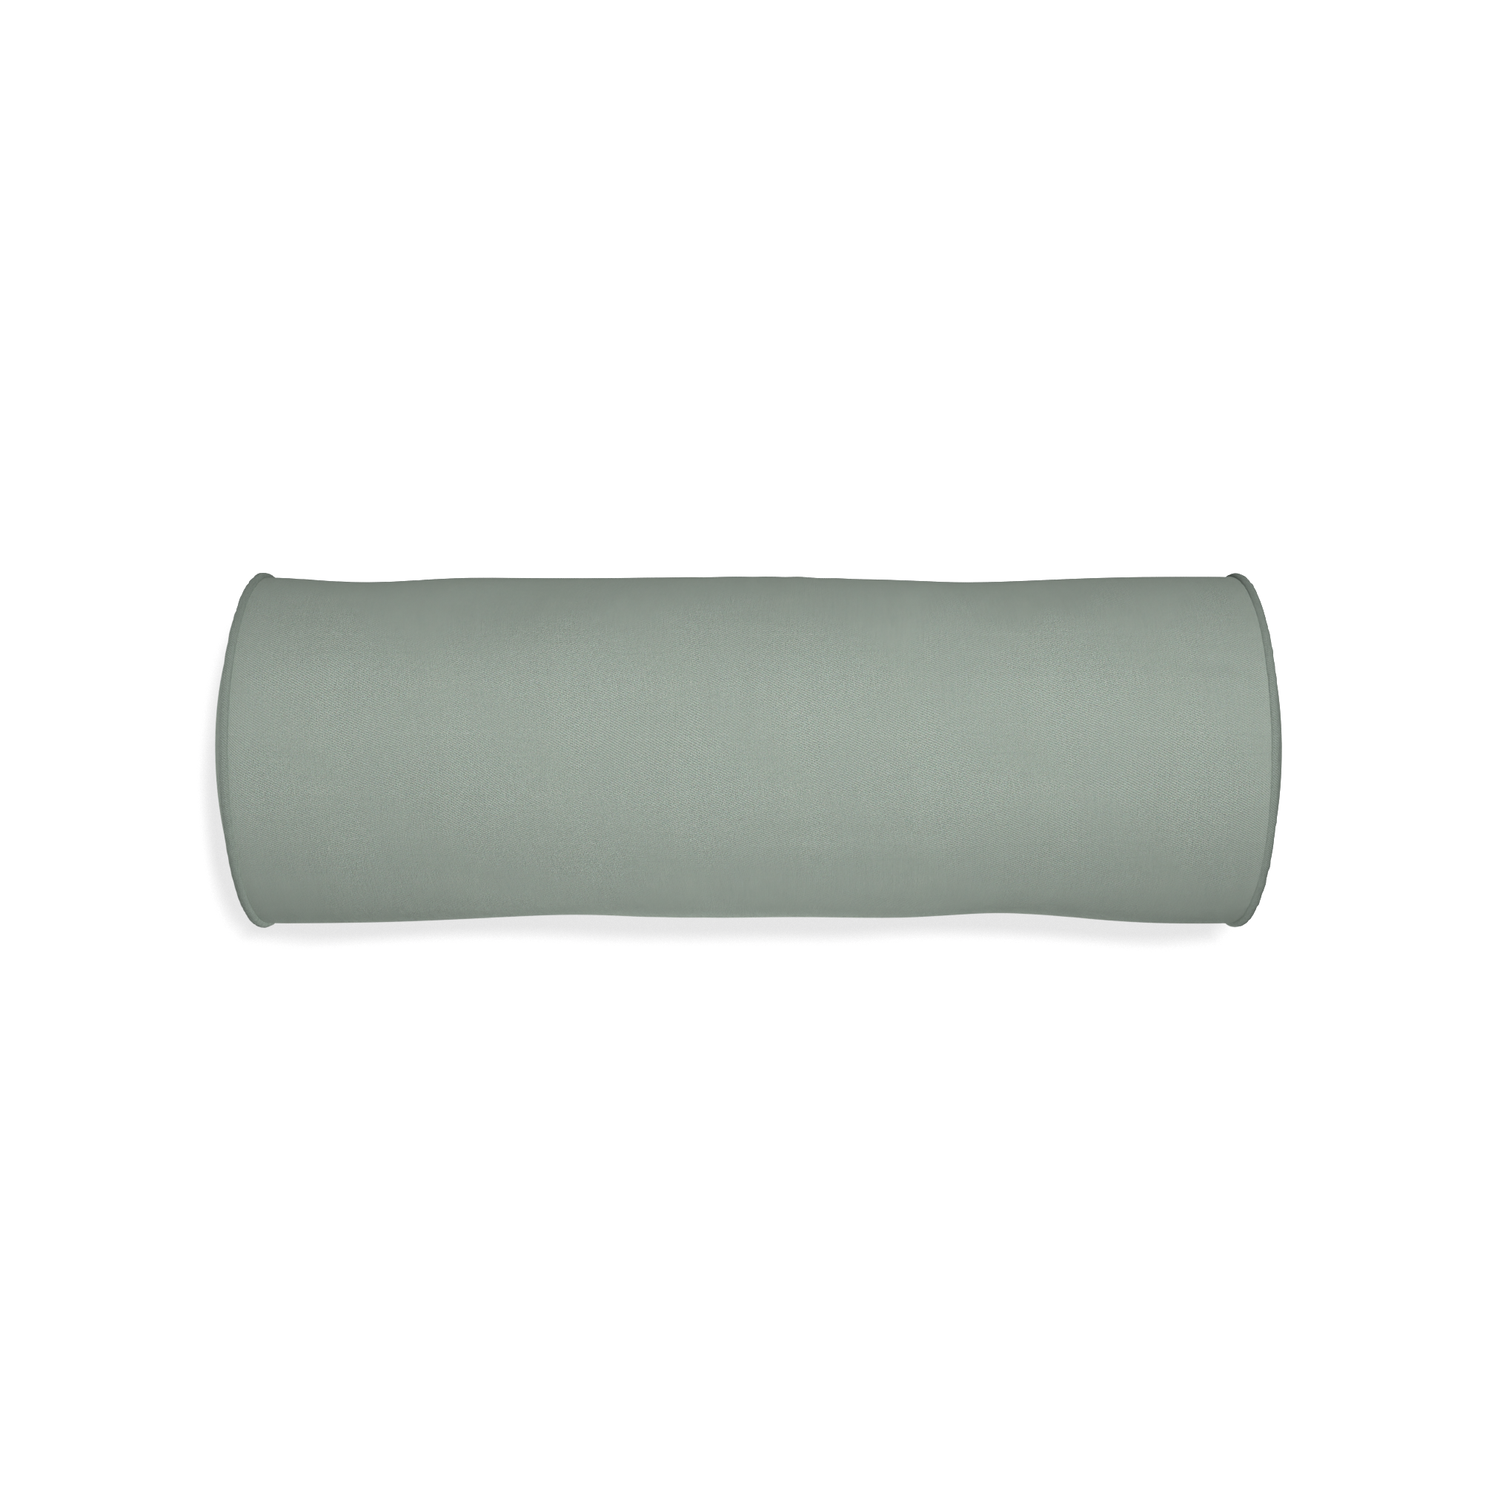 Bolster sage custom sage green cottonpillow with sage piping on white background